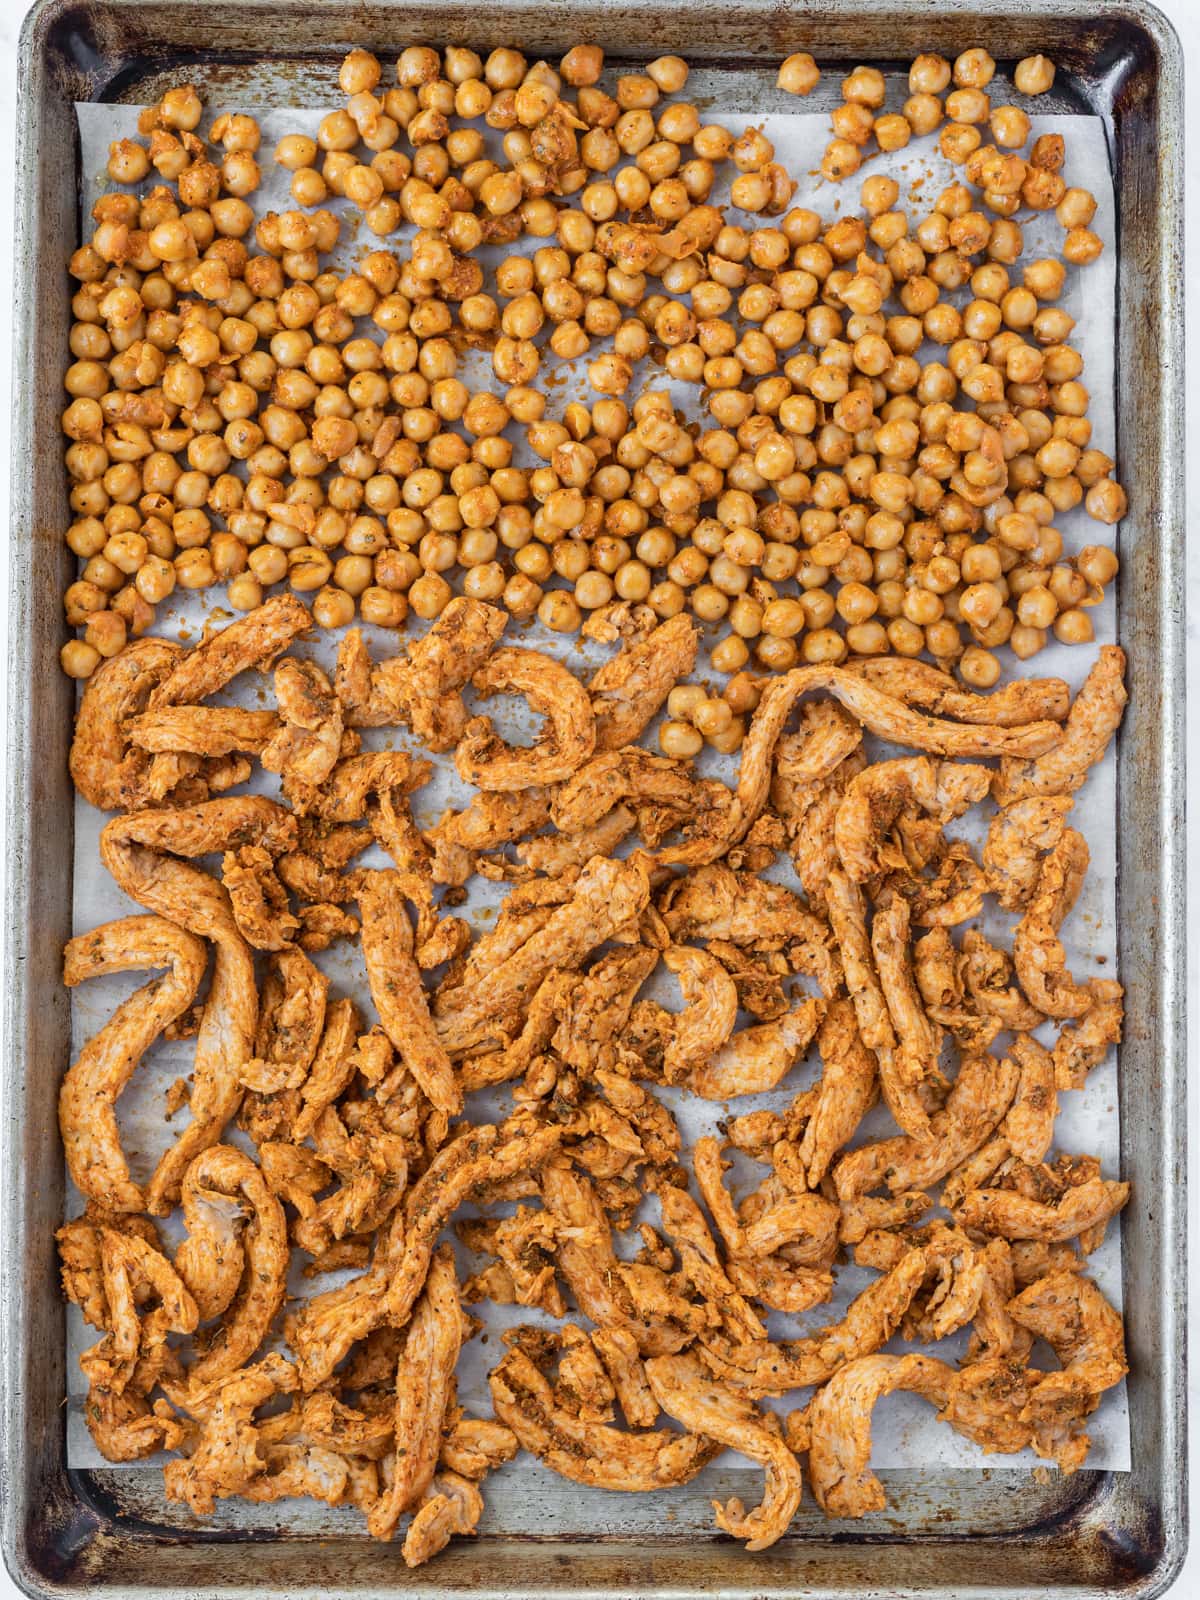 Spicy chickpeas and soy curls on a baking sheet before going into oven.